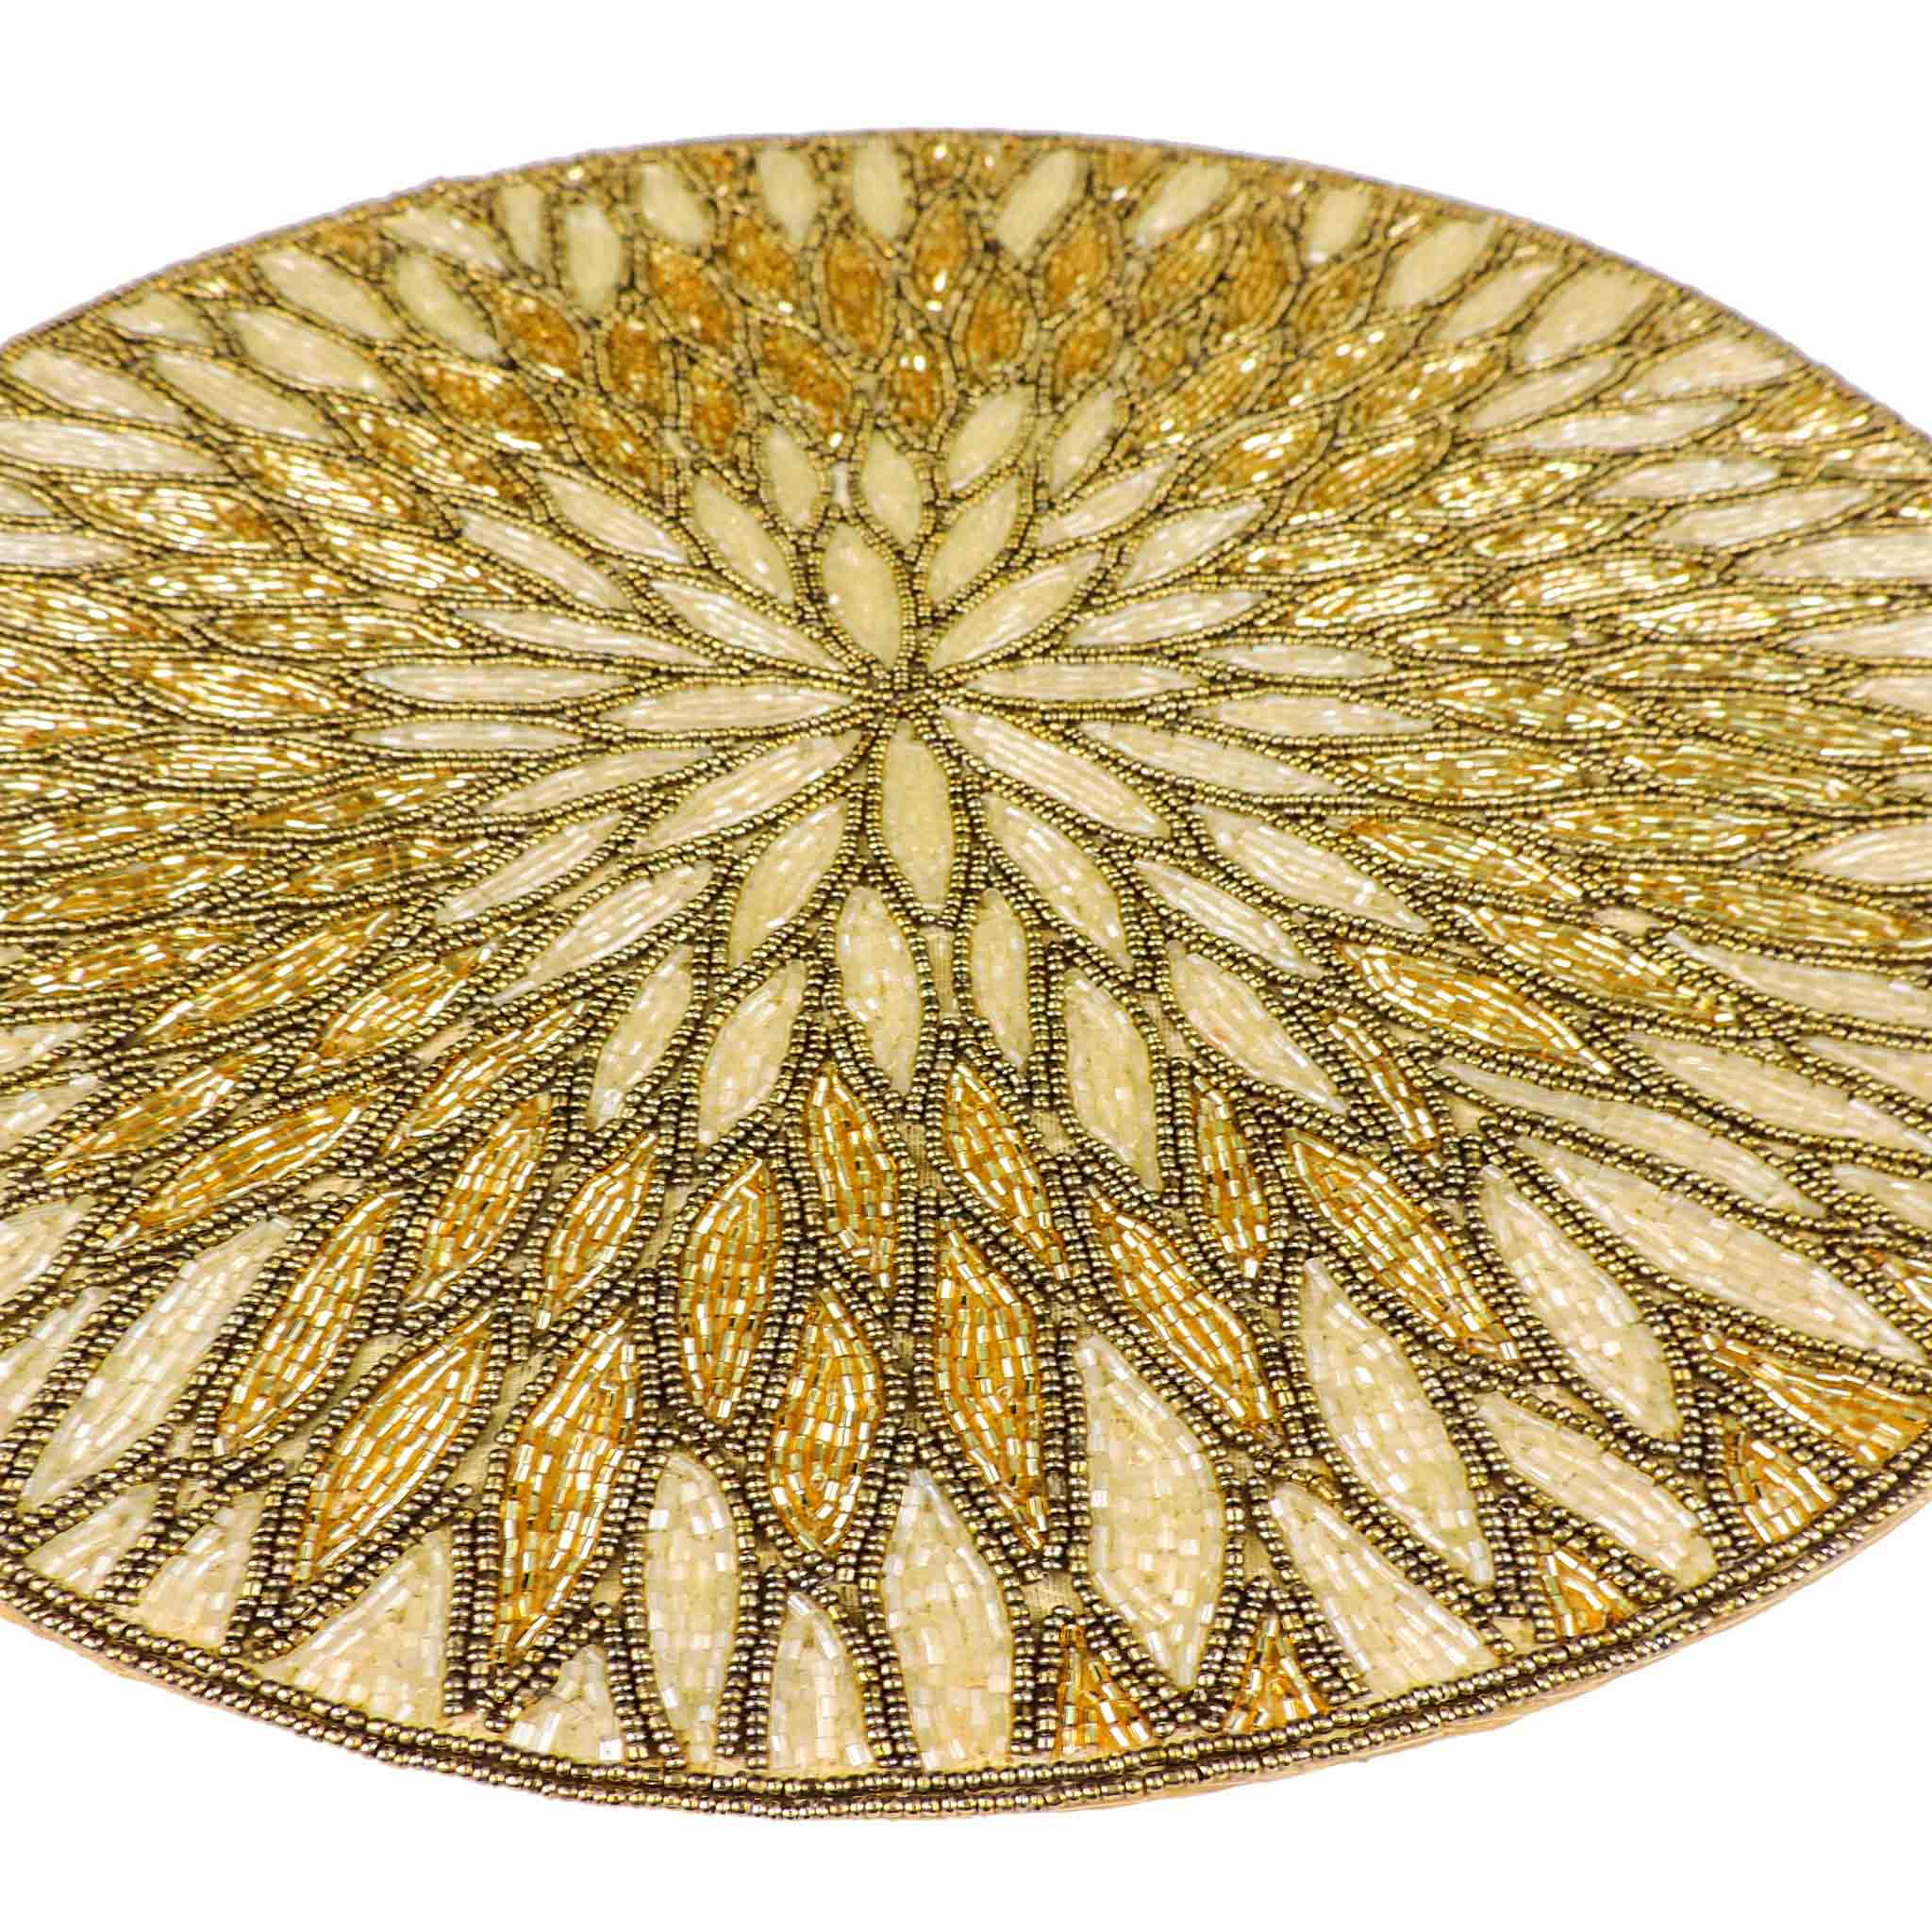 Chrysanthemum Bead Embroidered Placemat in Gold, Set of 2